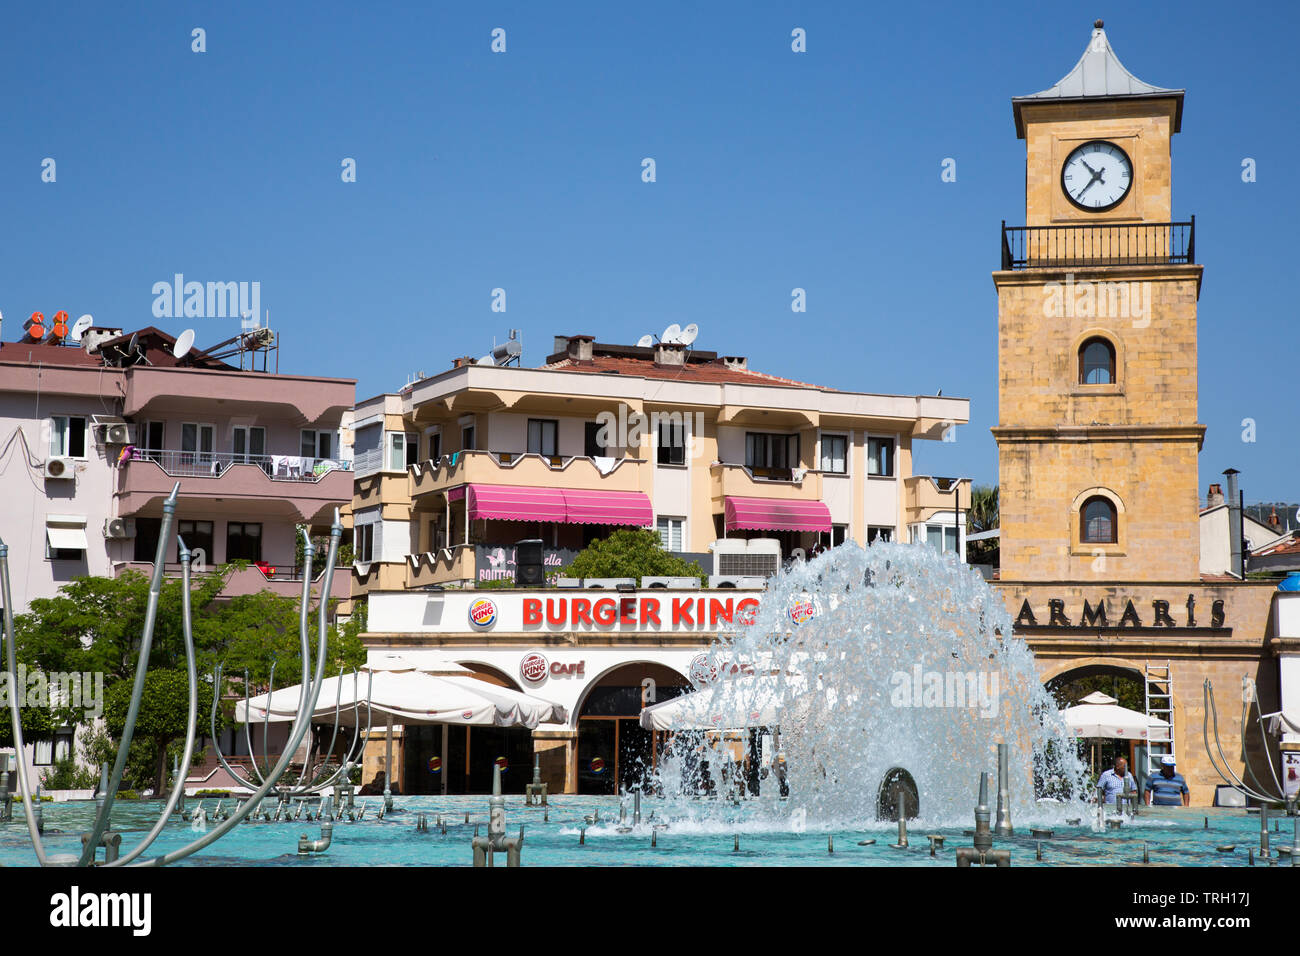 Burger King restaurant and the town clock tower in the Dancing fountains Square, Marmaris, Mugla province, Turkey Stock Photo